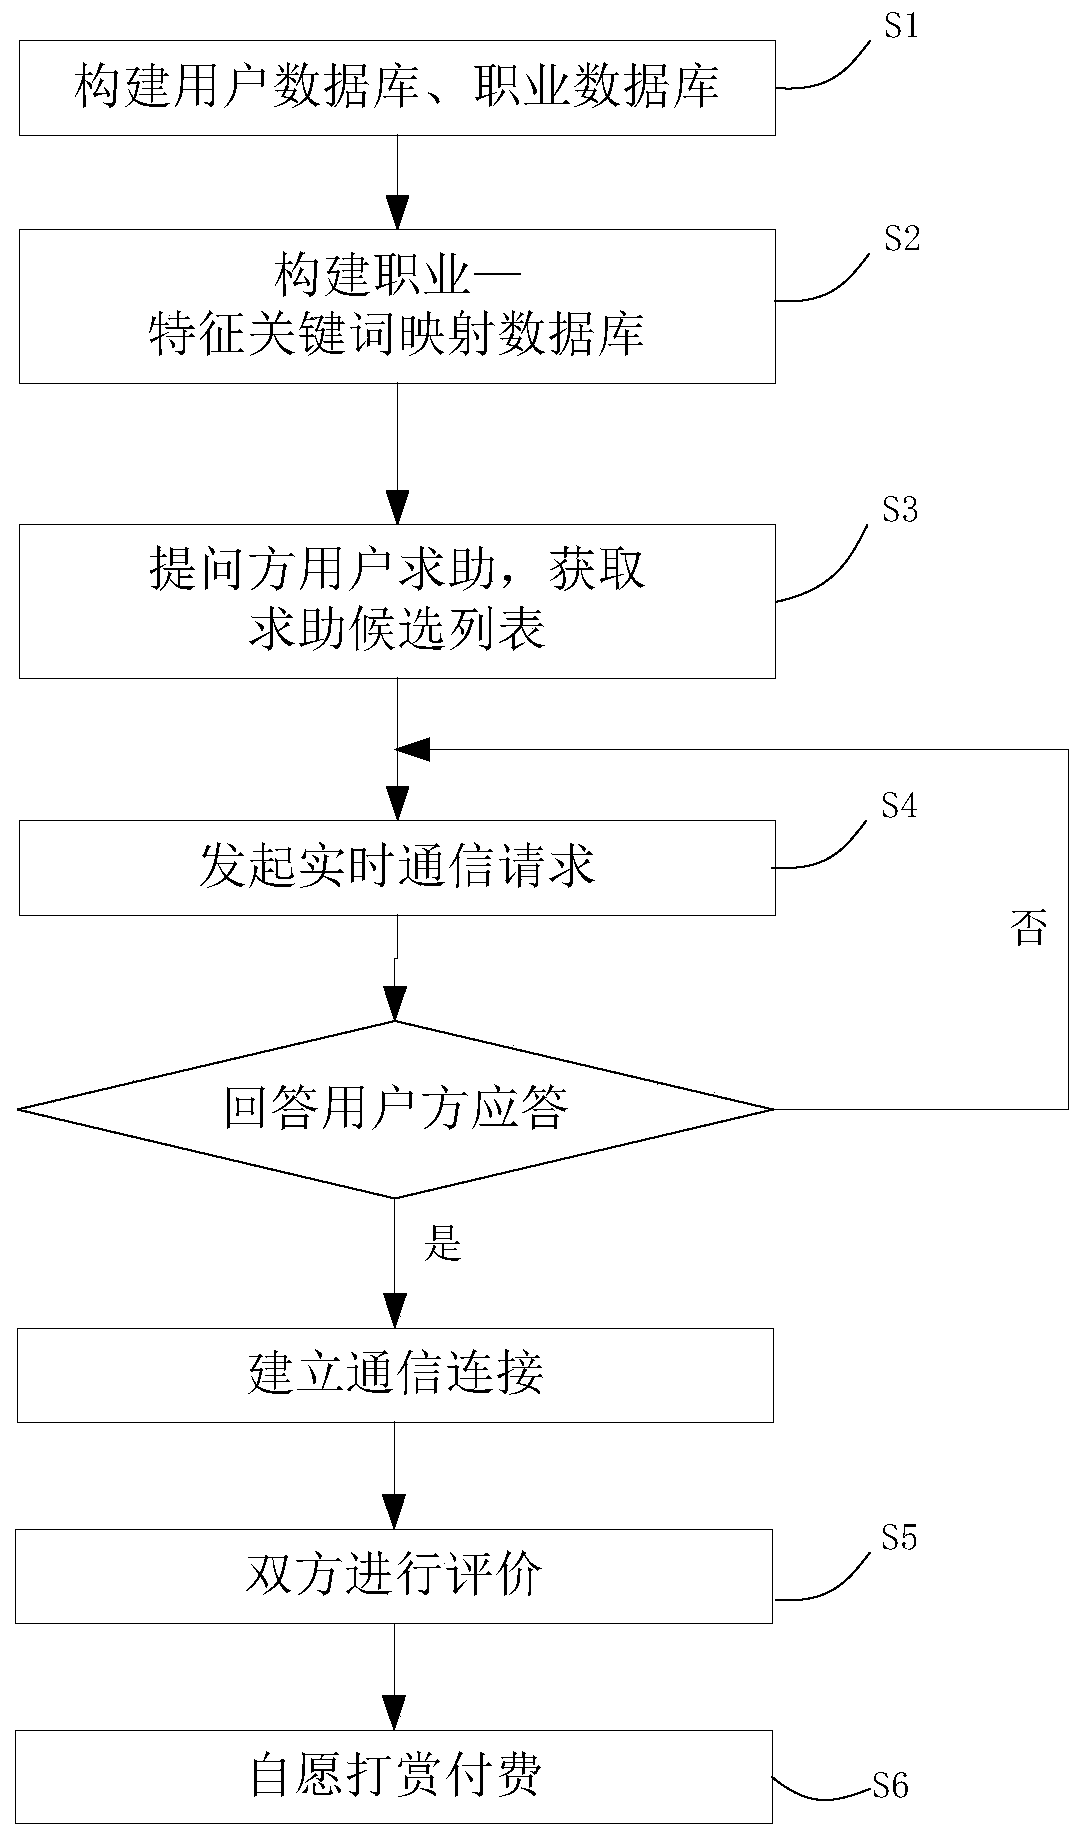 Real-time interactive question and answer consultation system and method